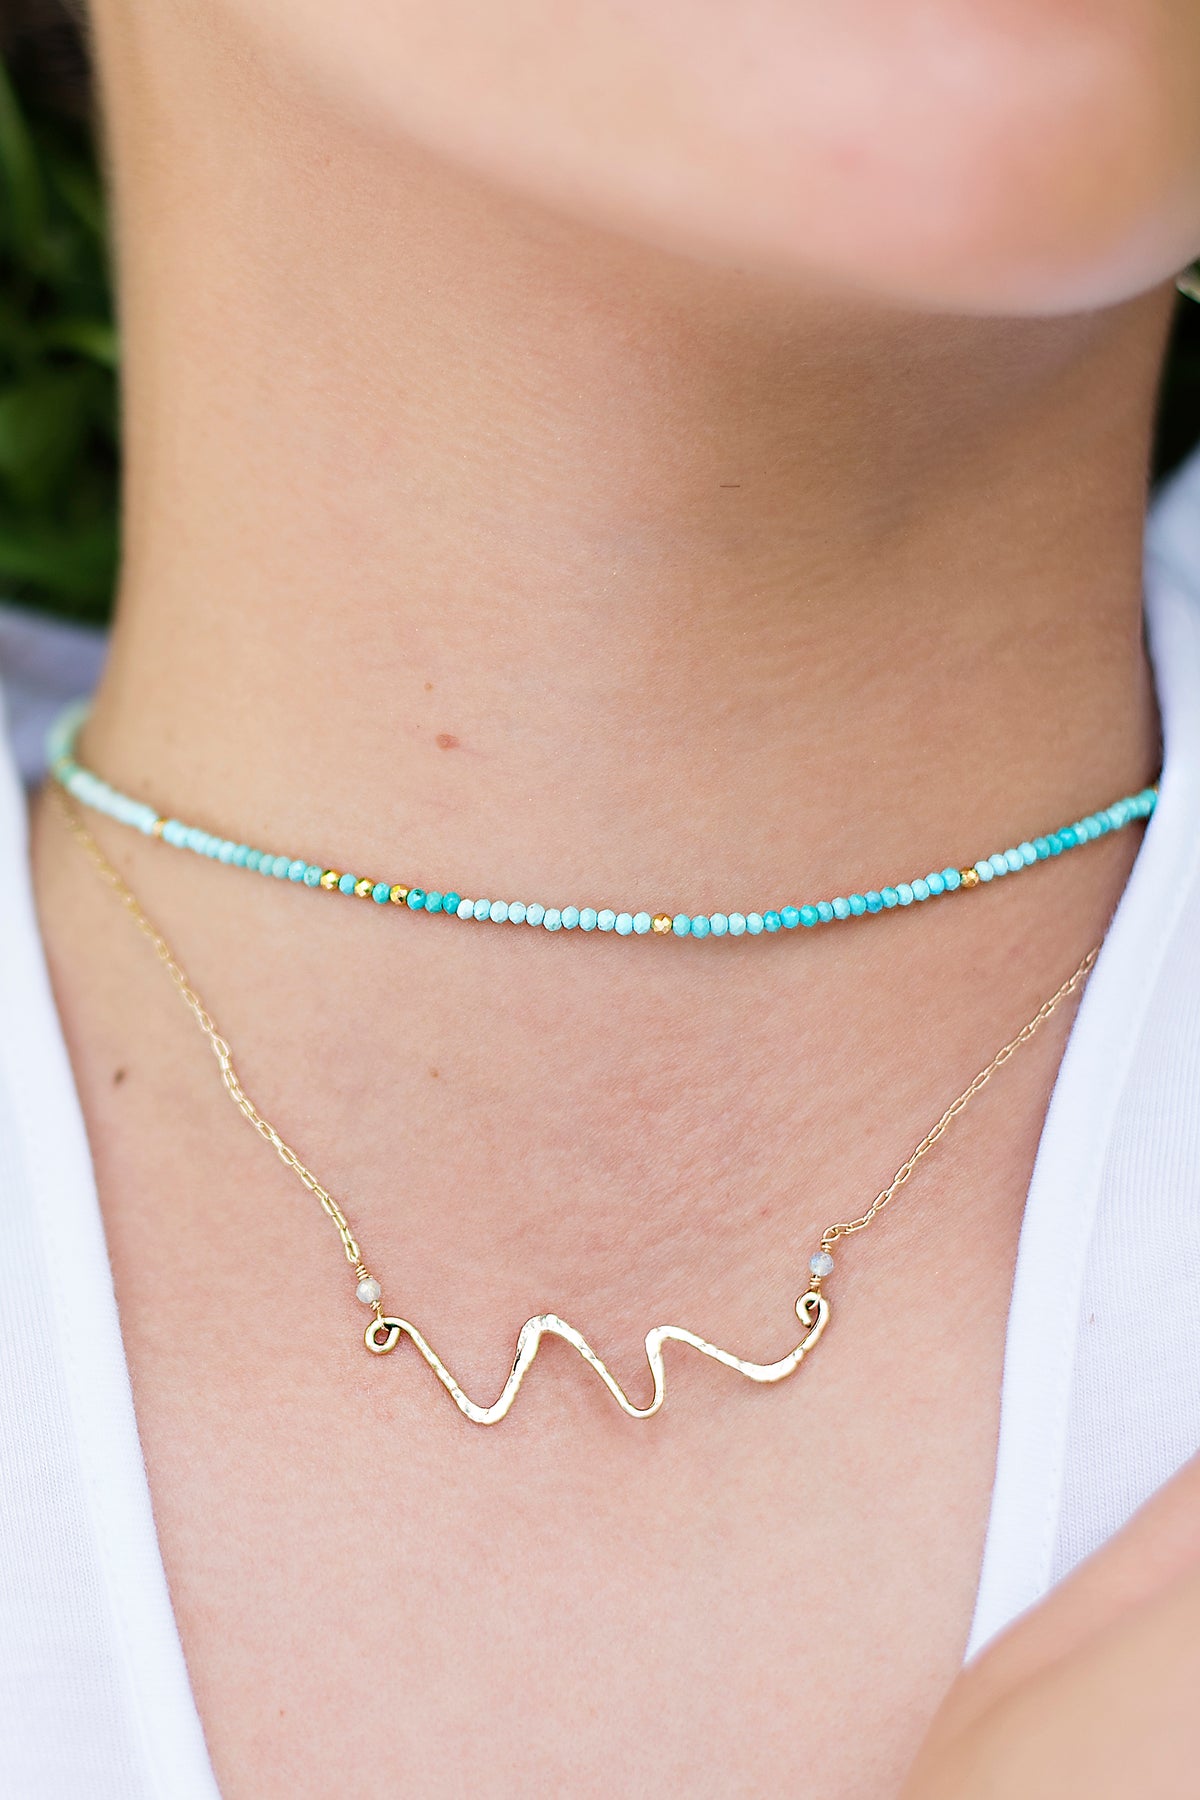 Turquoise Ombre Necklace